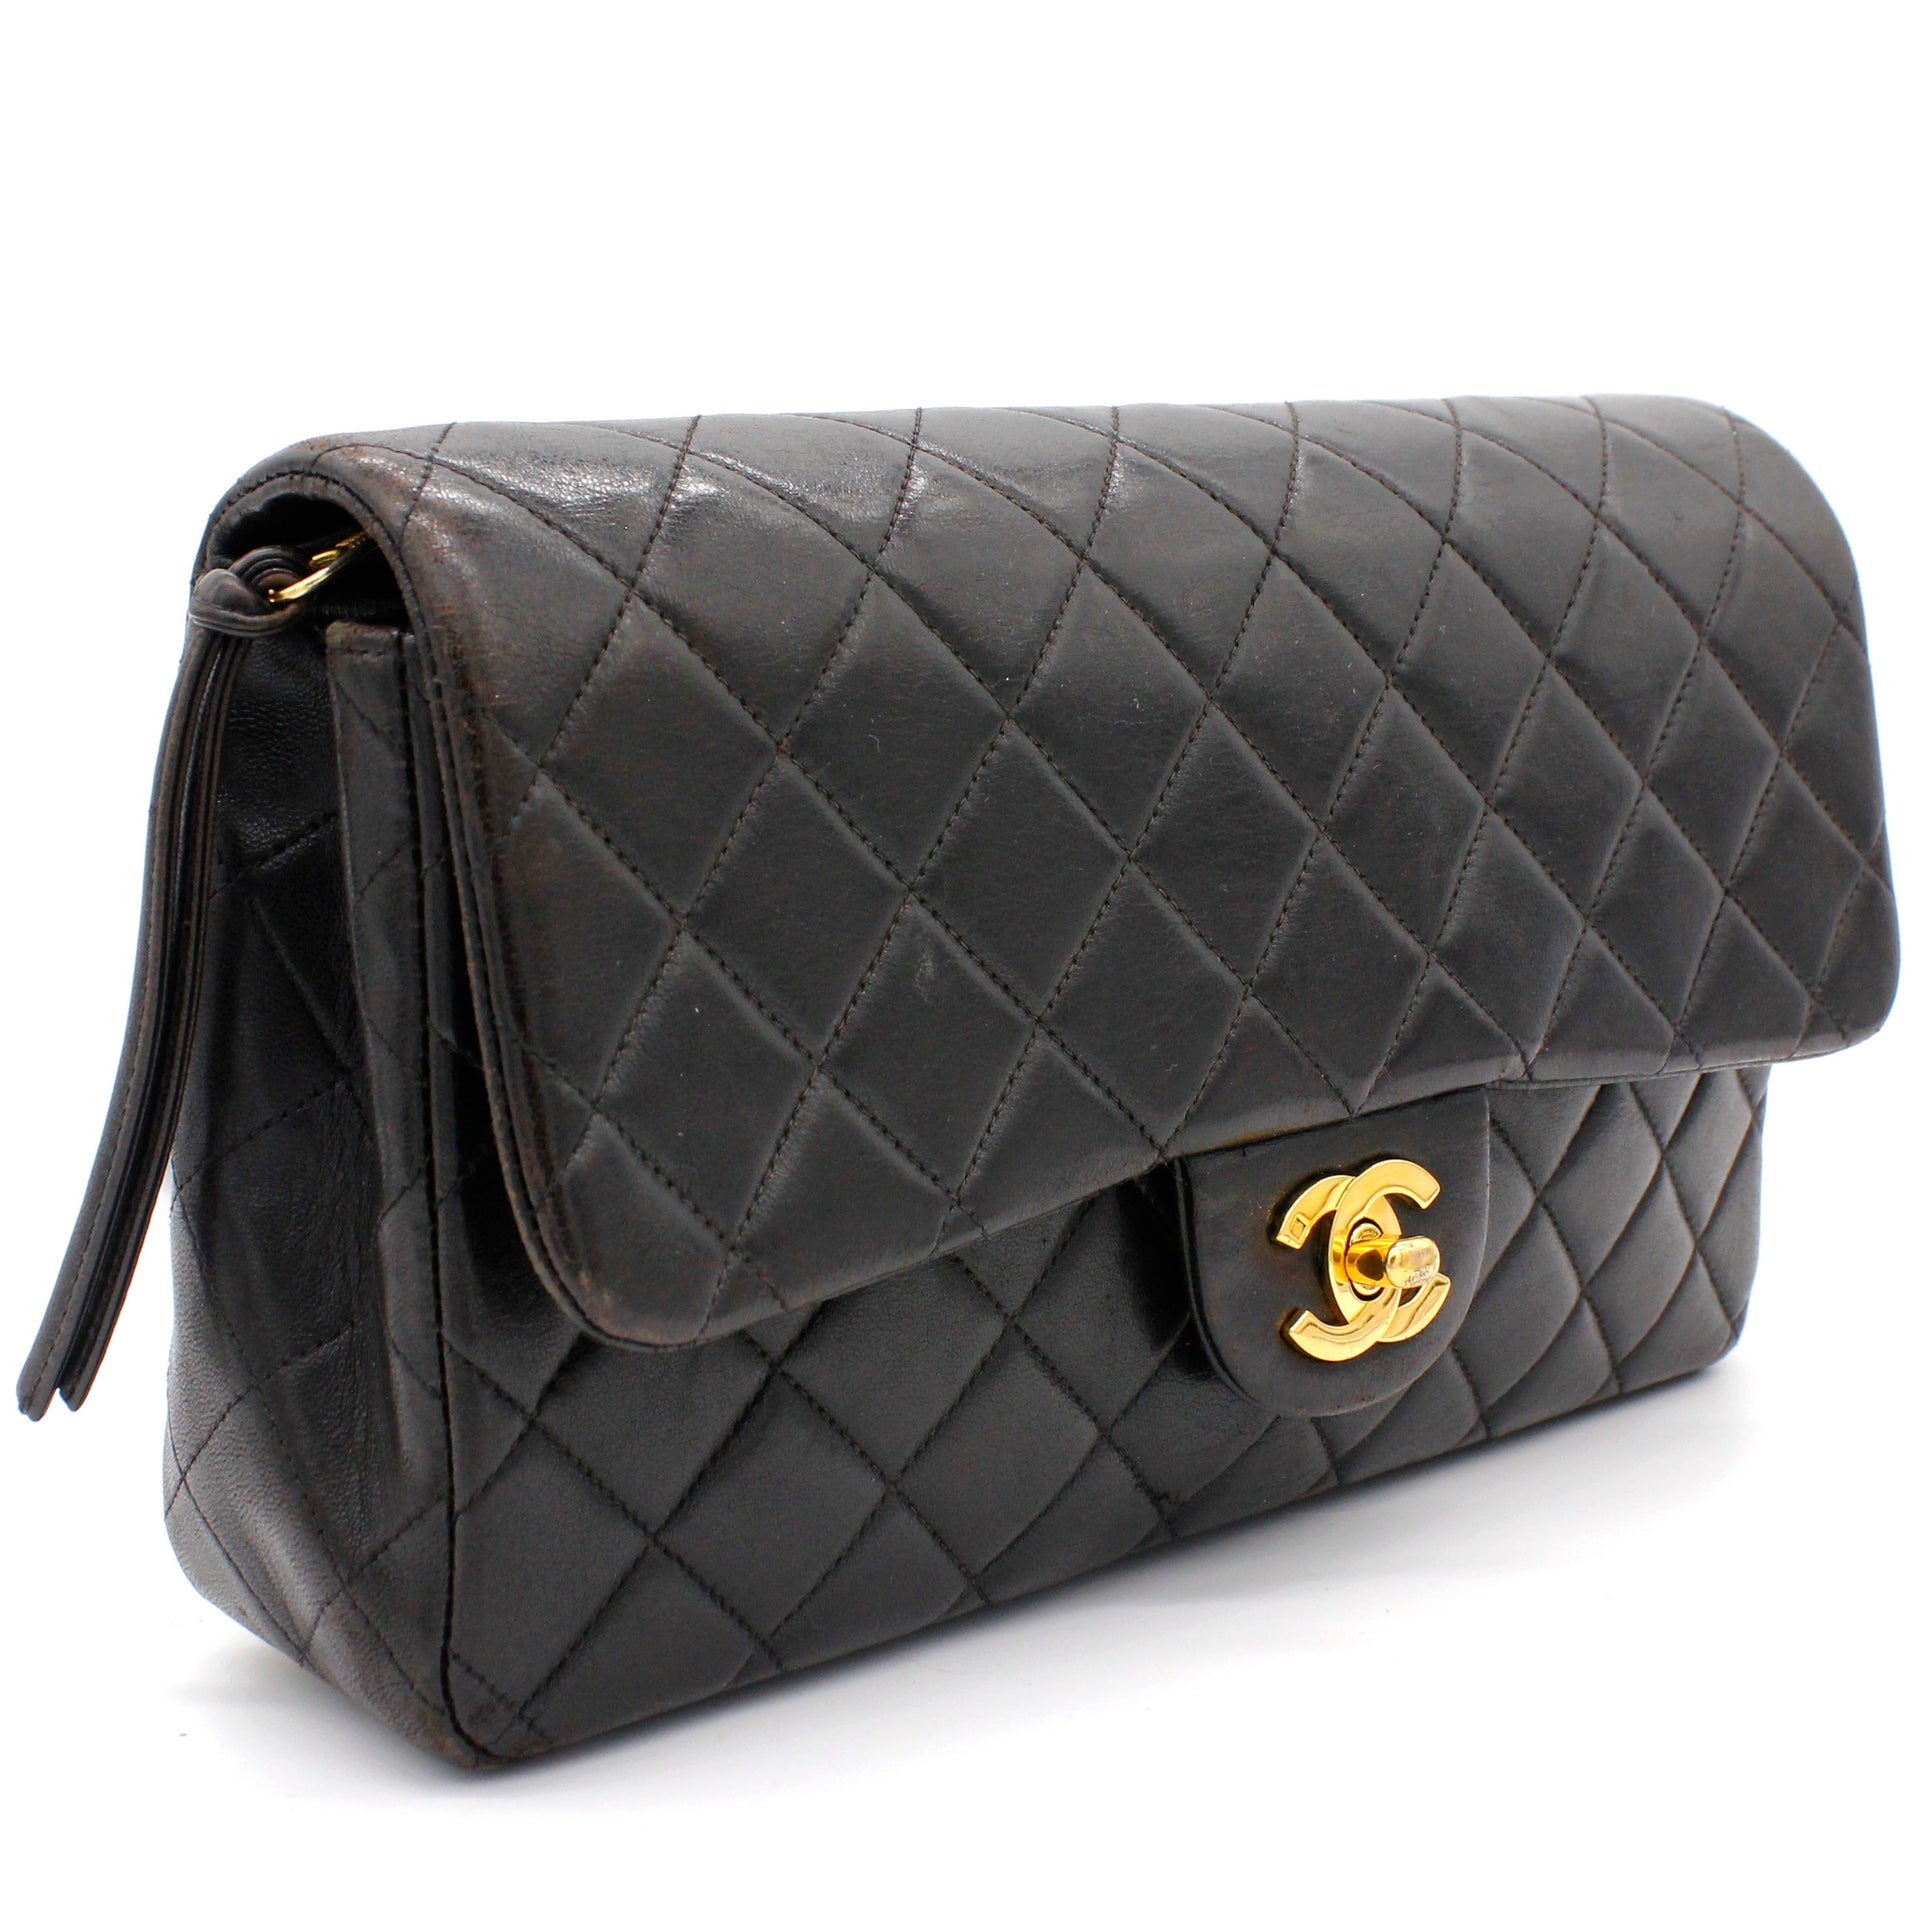 SHOP - CHANEL - Page 26 - VLuxeStyle